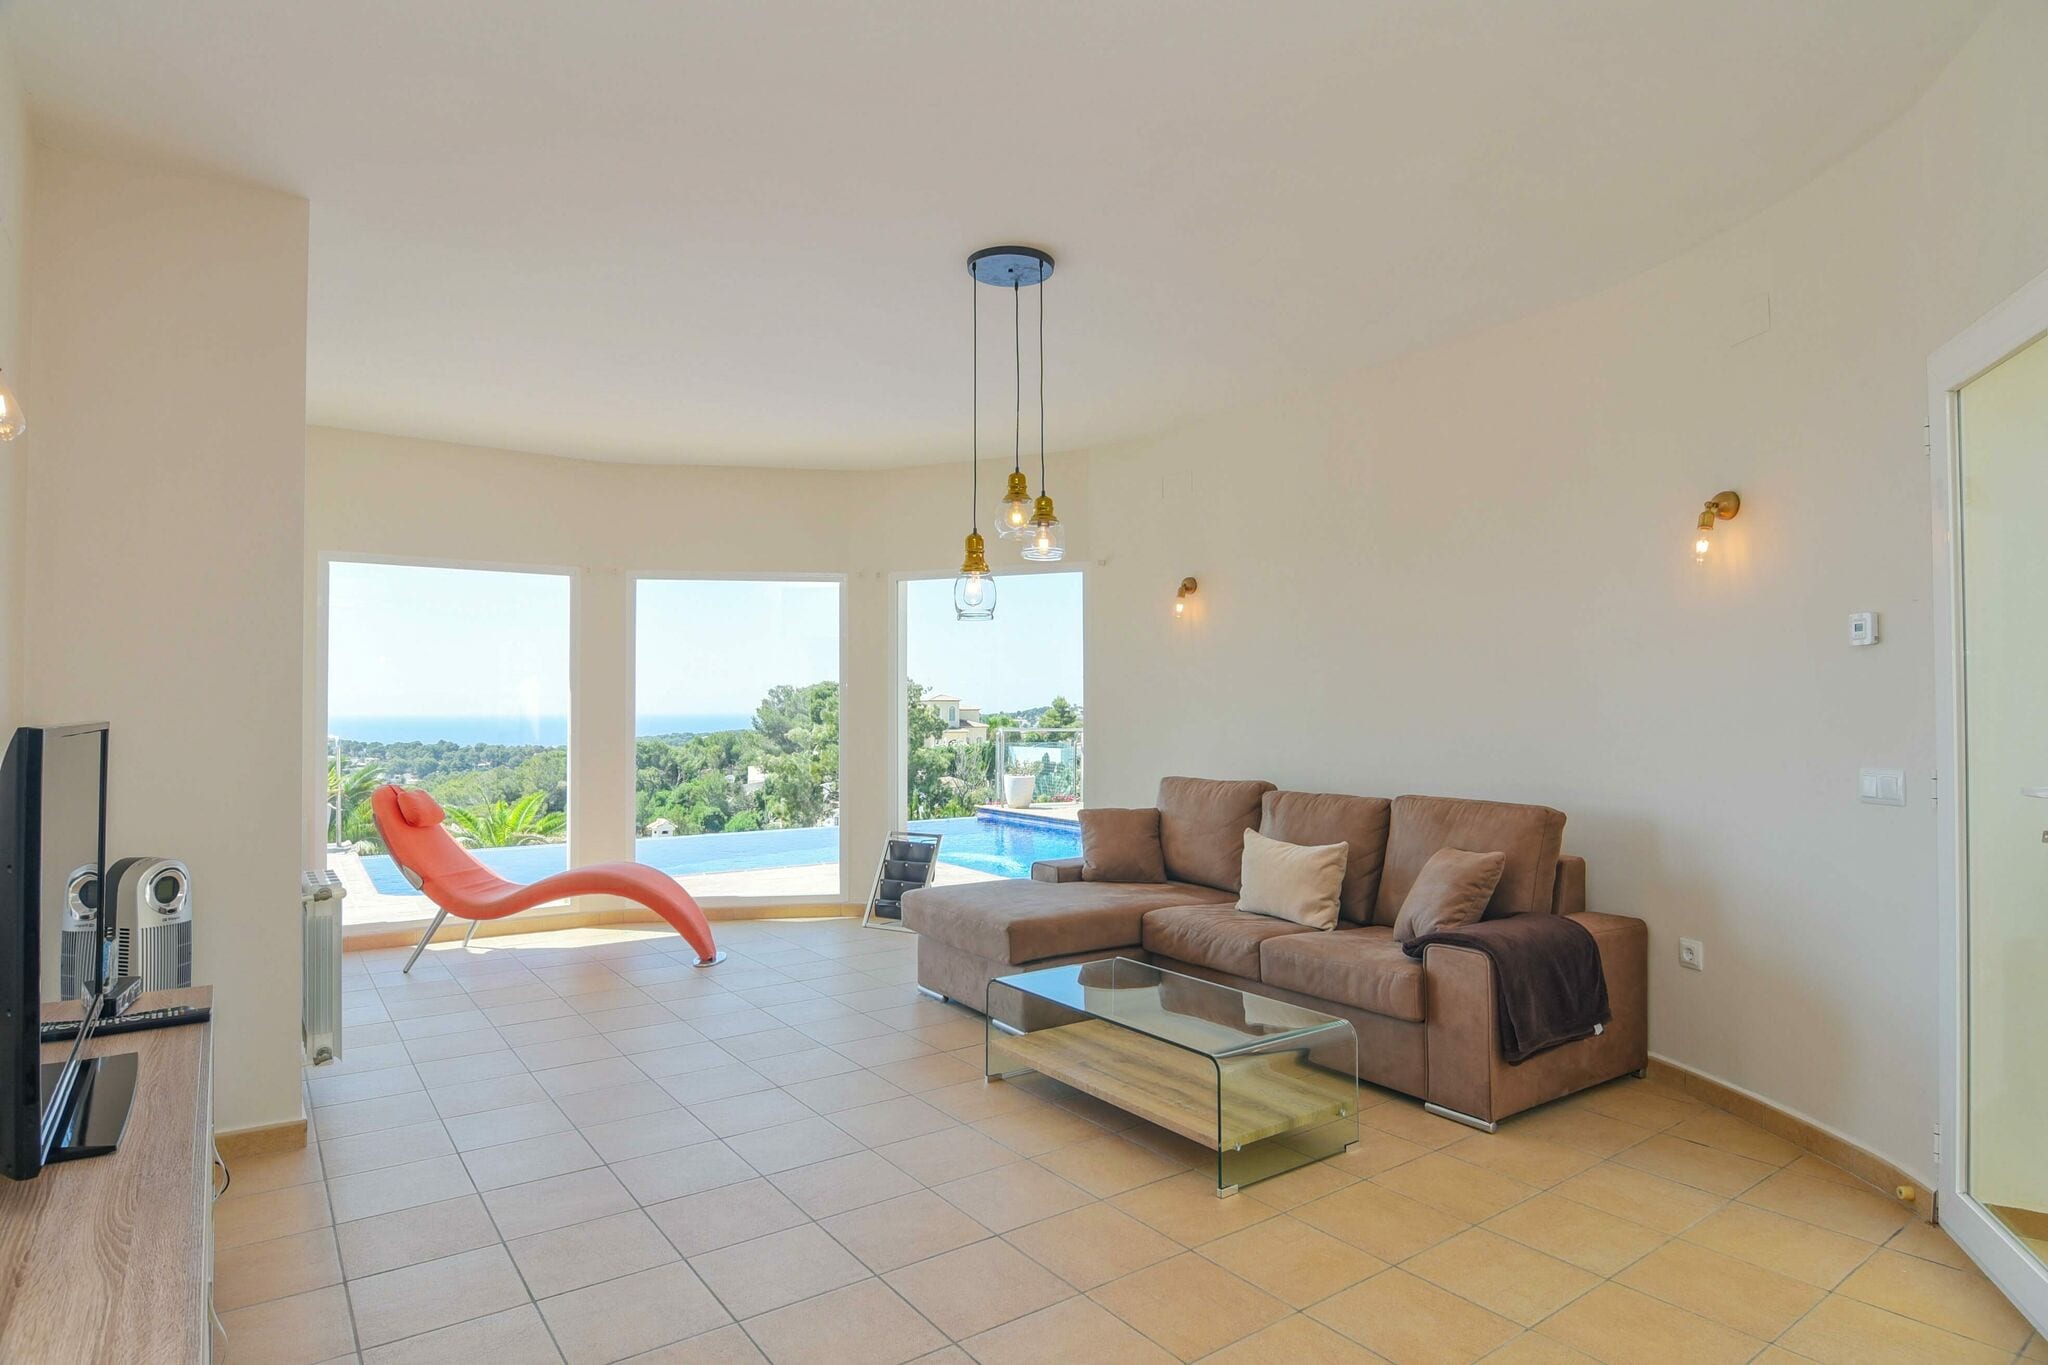 Great villa in Moraira with infinity pool